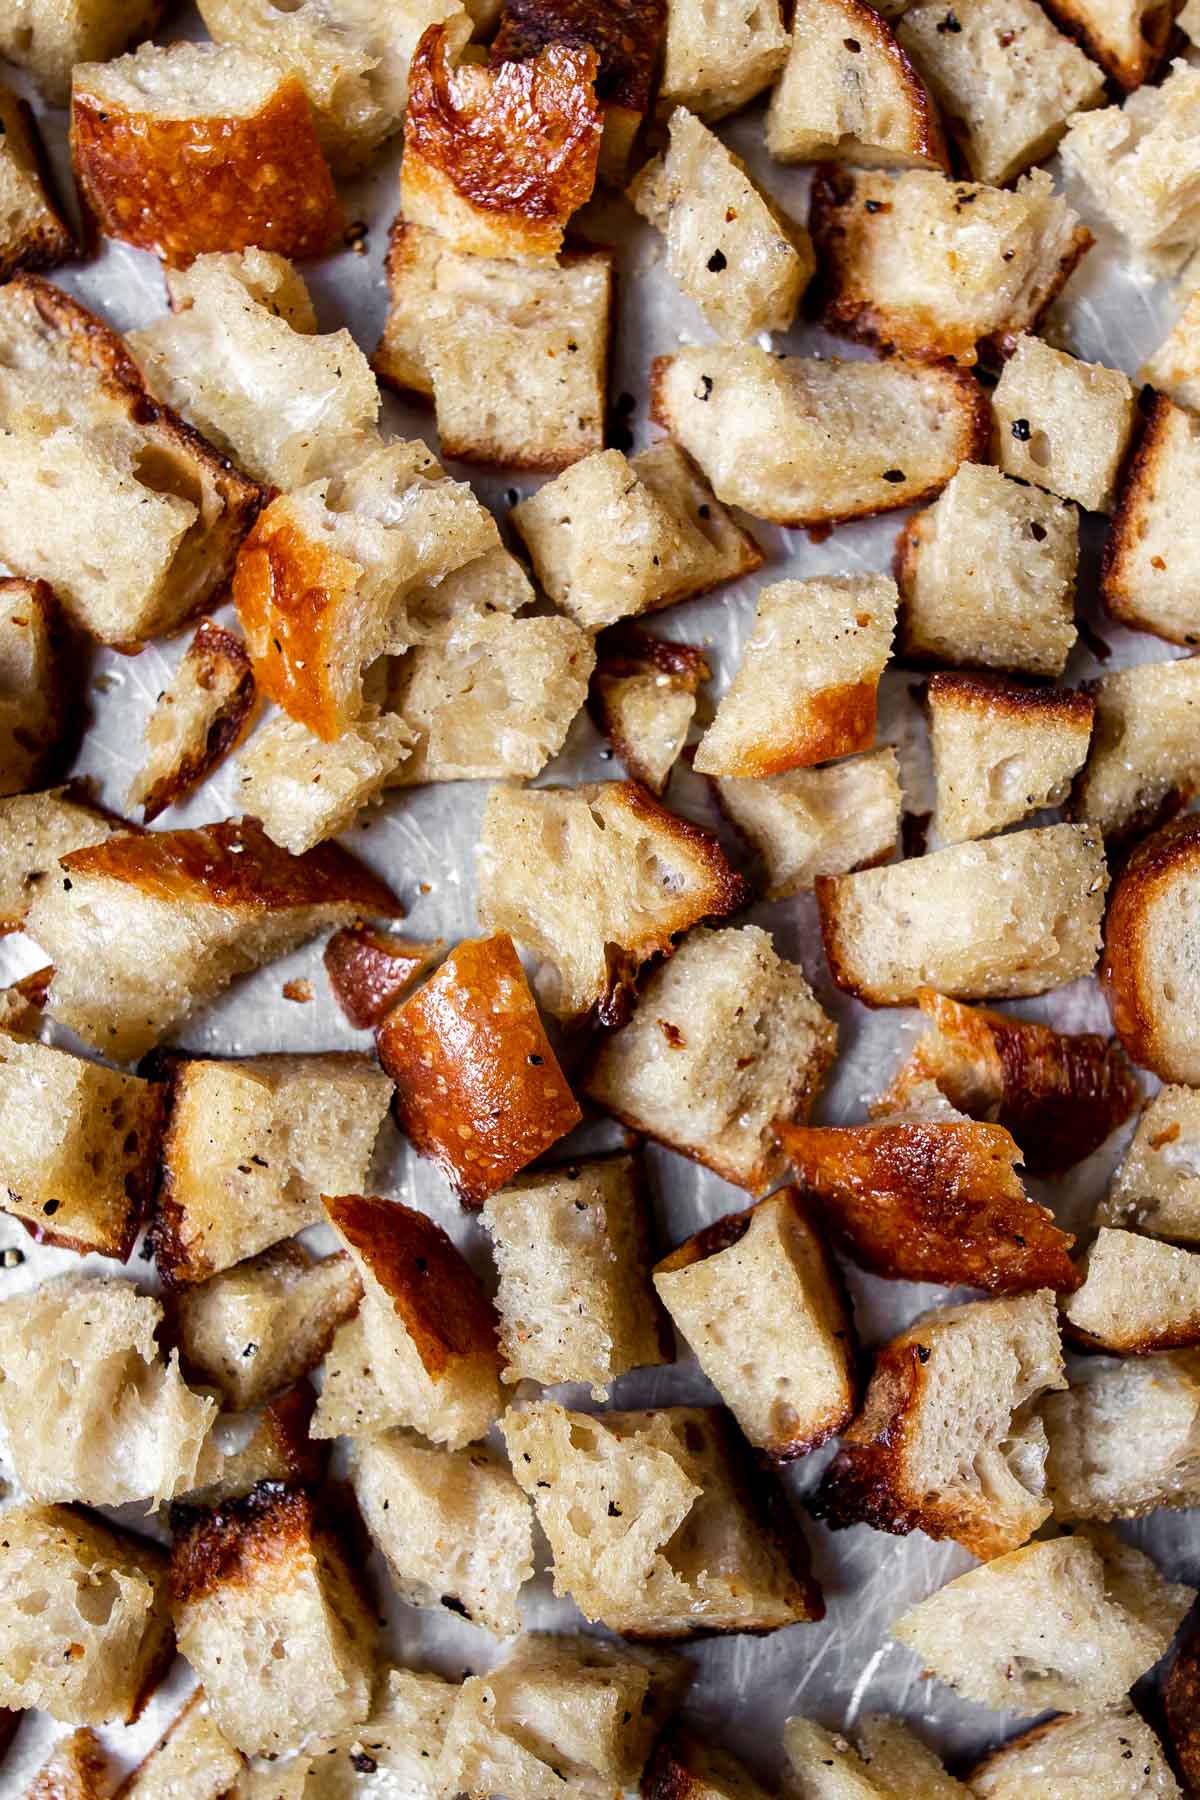 Baked sourdough croutons on a sheetpan.